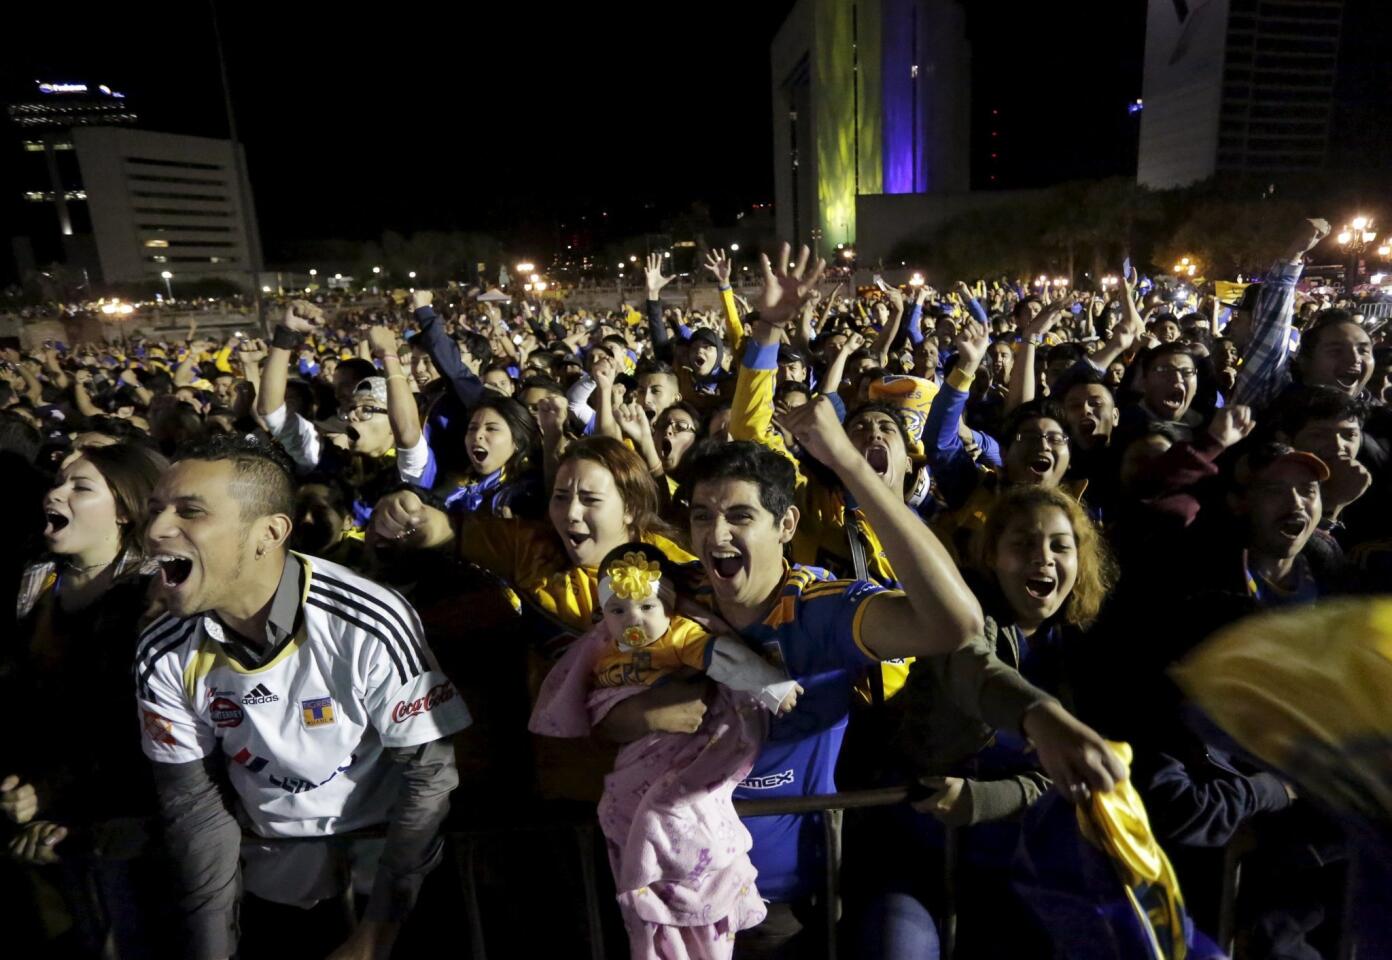 Football Soccer - Pumas v Tigres - The second leg of their Mexican first division final soccer match - Fans of Tigres cheer as they watch the match on a big screen during a public viewing event in Monterrey, Mexico - 14/12/15 REUTERS/Daniel Becerril ** Usable by SD ONLY **